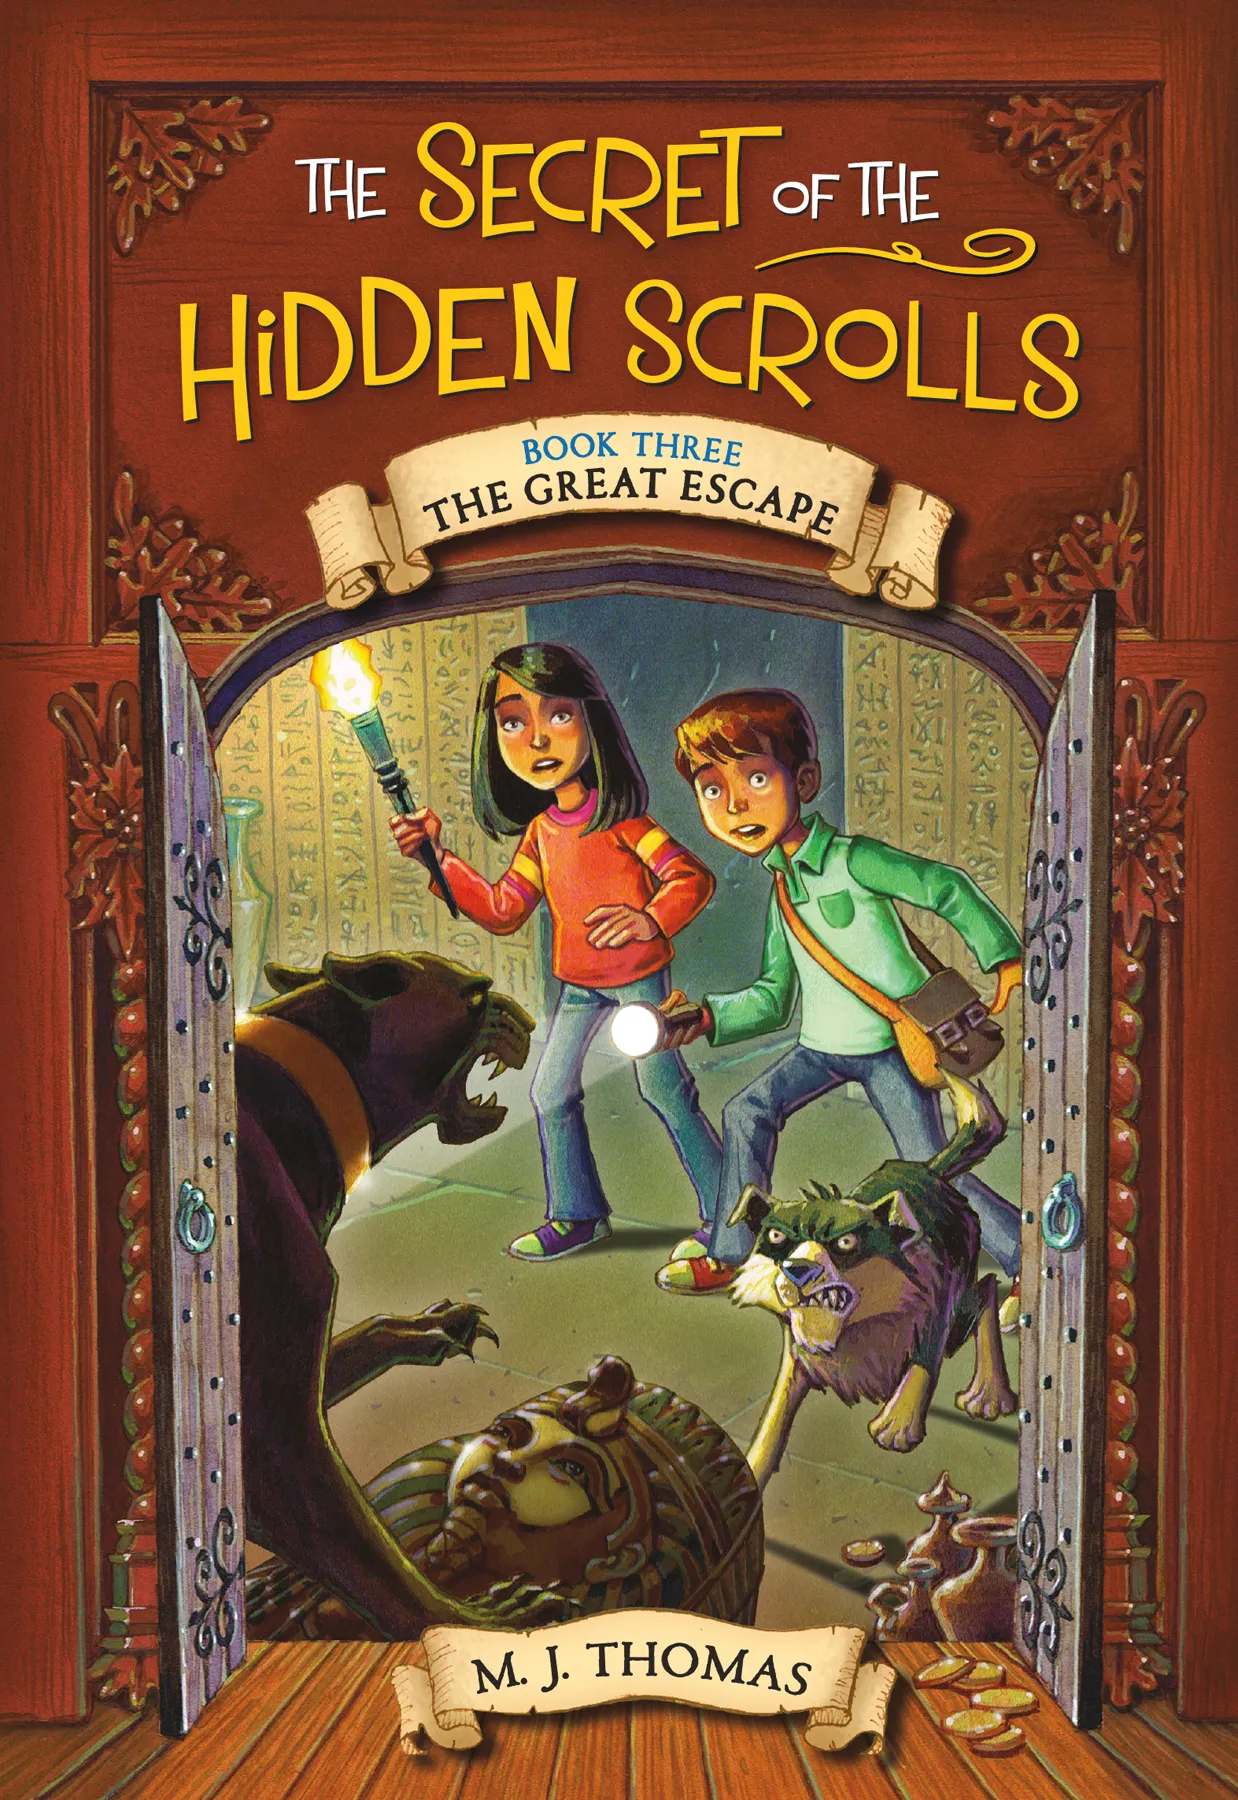 The Great Escape (The Secret of the Hidden Scrolls #3)